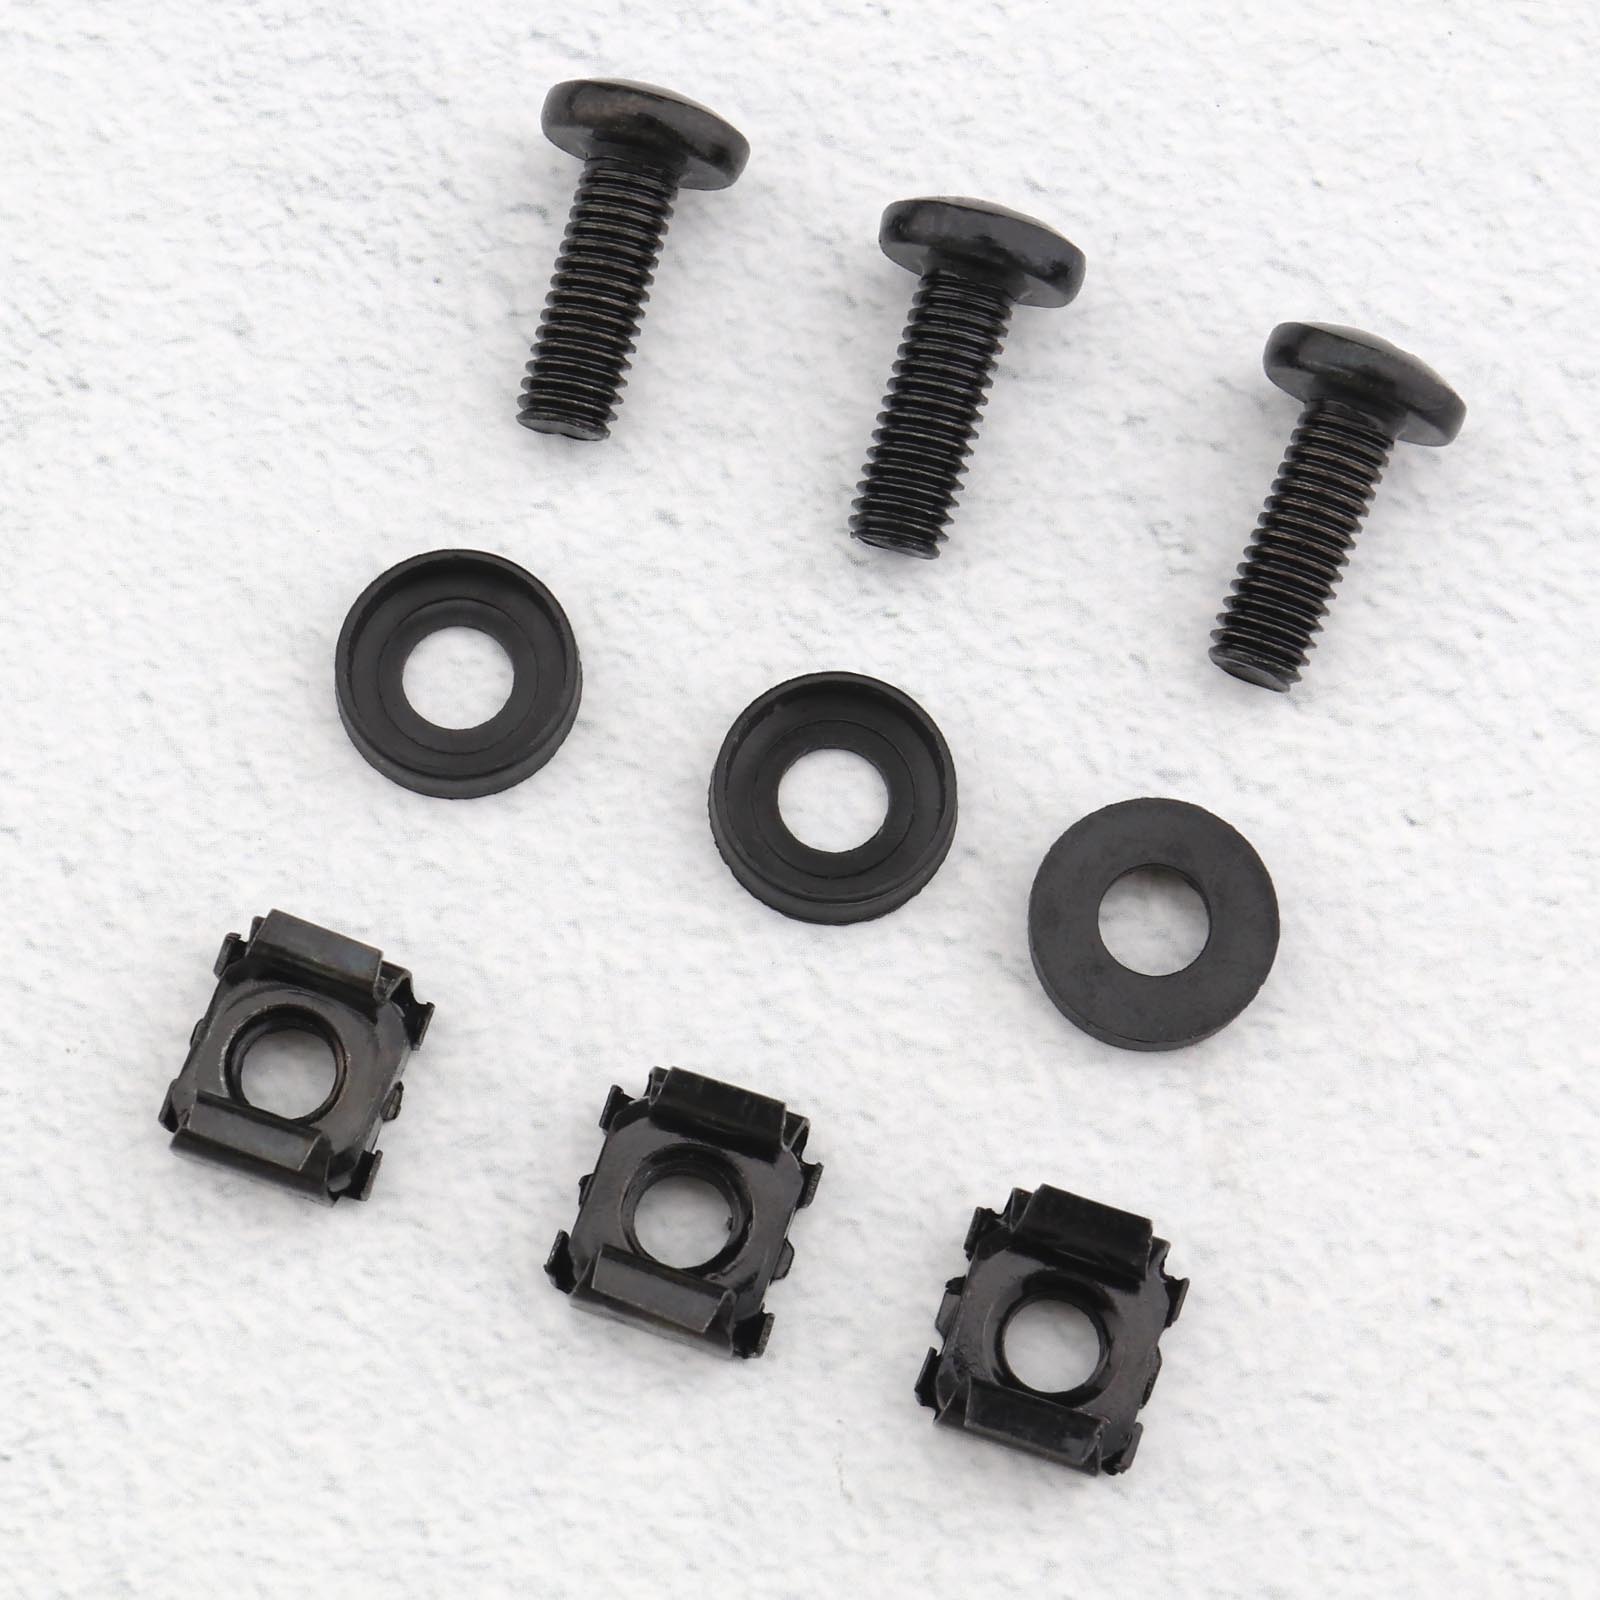 Bolts Screws Washers For Data Cabinets 50 All Black M6 Cage Nuts